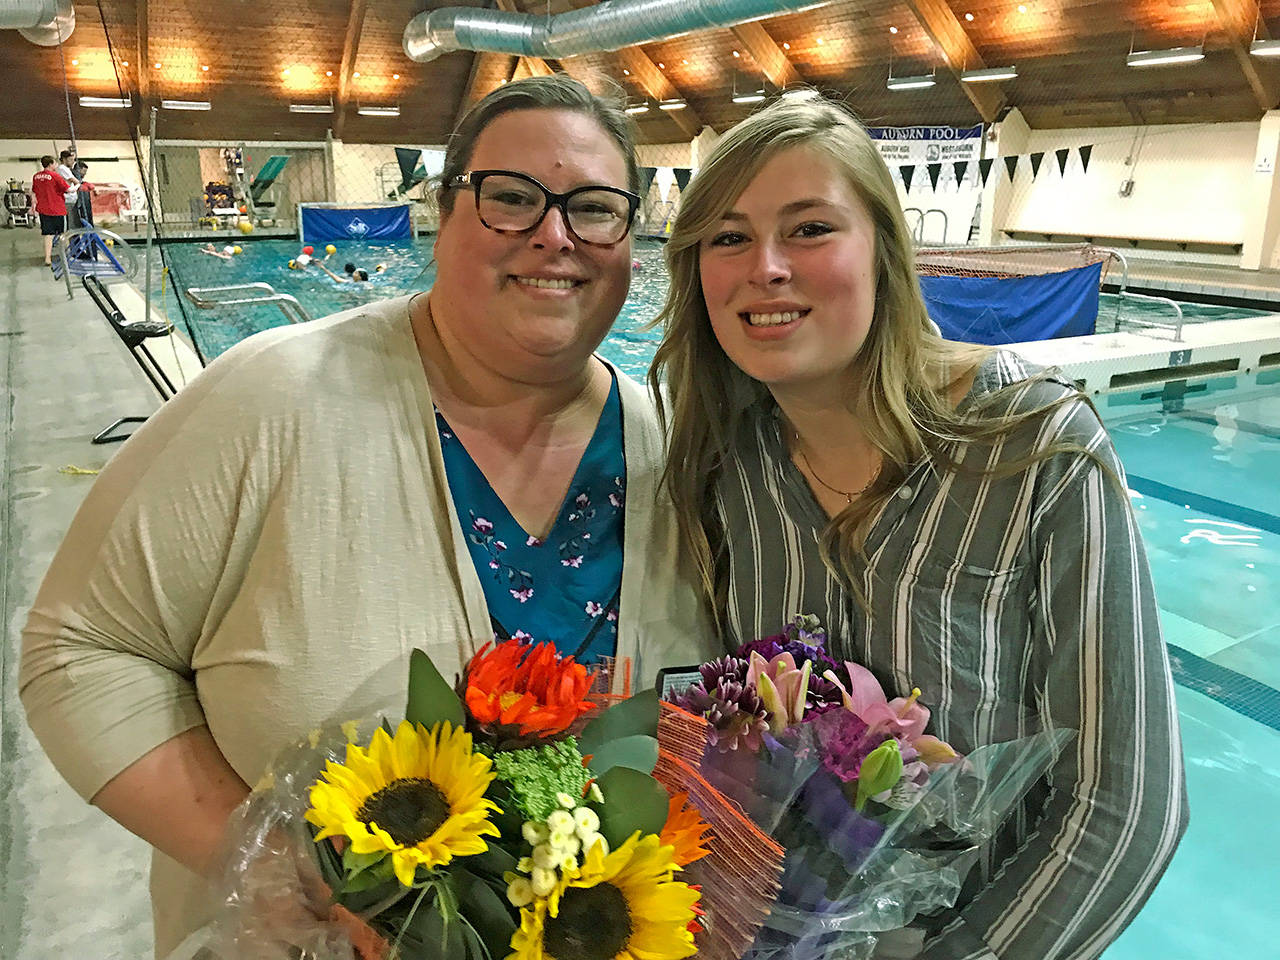 Reese Marlenee, right, and her mother, Jessica, appear at the Auburn District Pool, where Reese collapsed from a heart attack at an Auburn Mountainview water polo team practice March 5. Thanks to first-responders, the 16-year-old girl is doing well today. Mother and daughter returned to the pool on Wednesday to honor and thank those responsible for saving the girl’s life. MARK KLAAS, Auburn Reporter